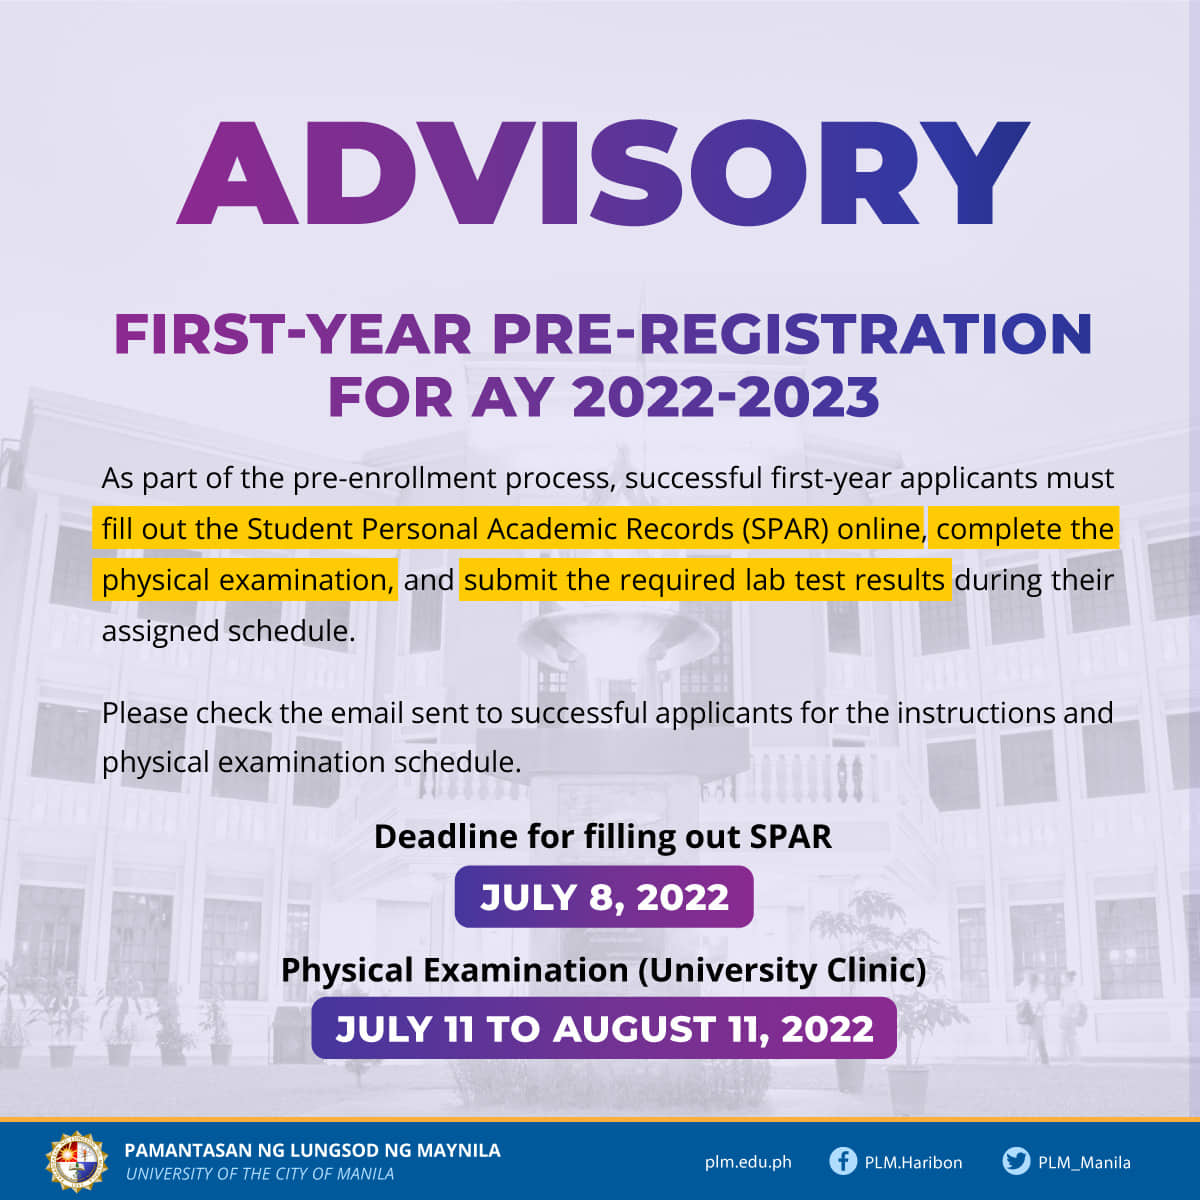 Advisory: First-year pre-registration for AY 2022-2023